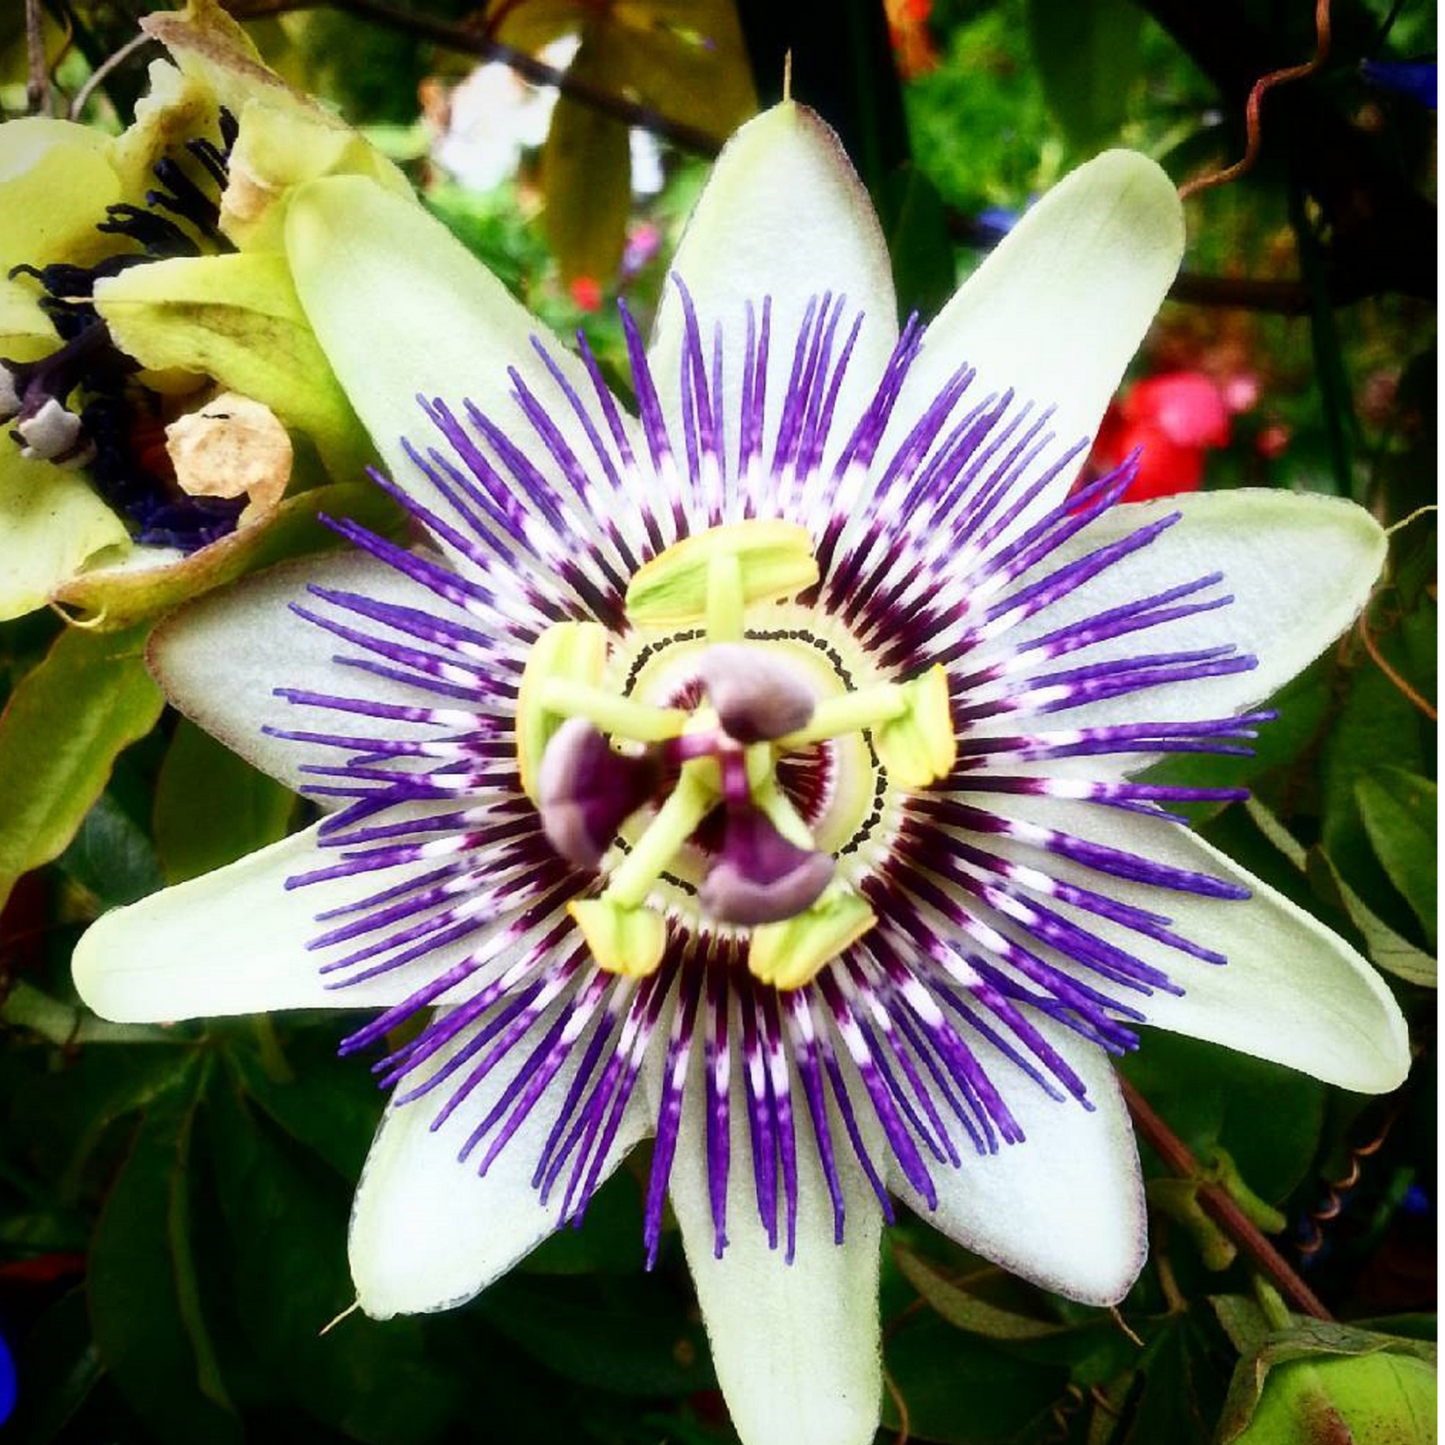 Passion Flower Herb for Calmness, Love and Prosperity